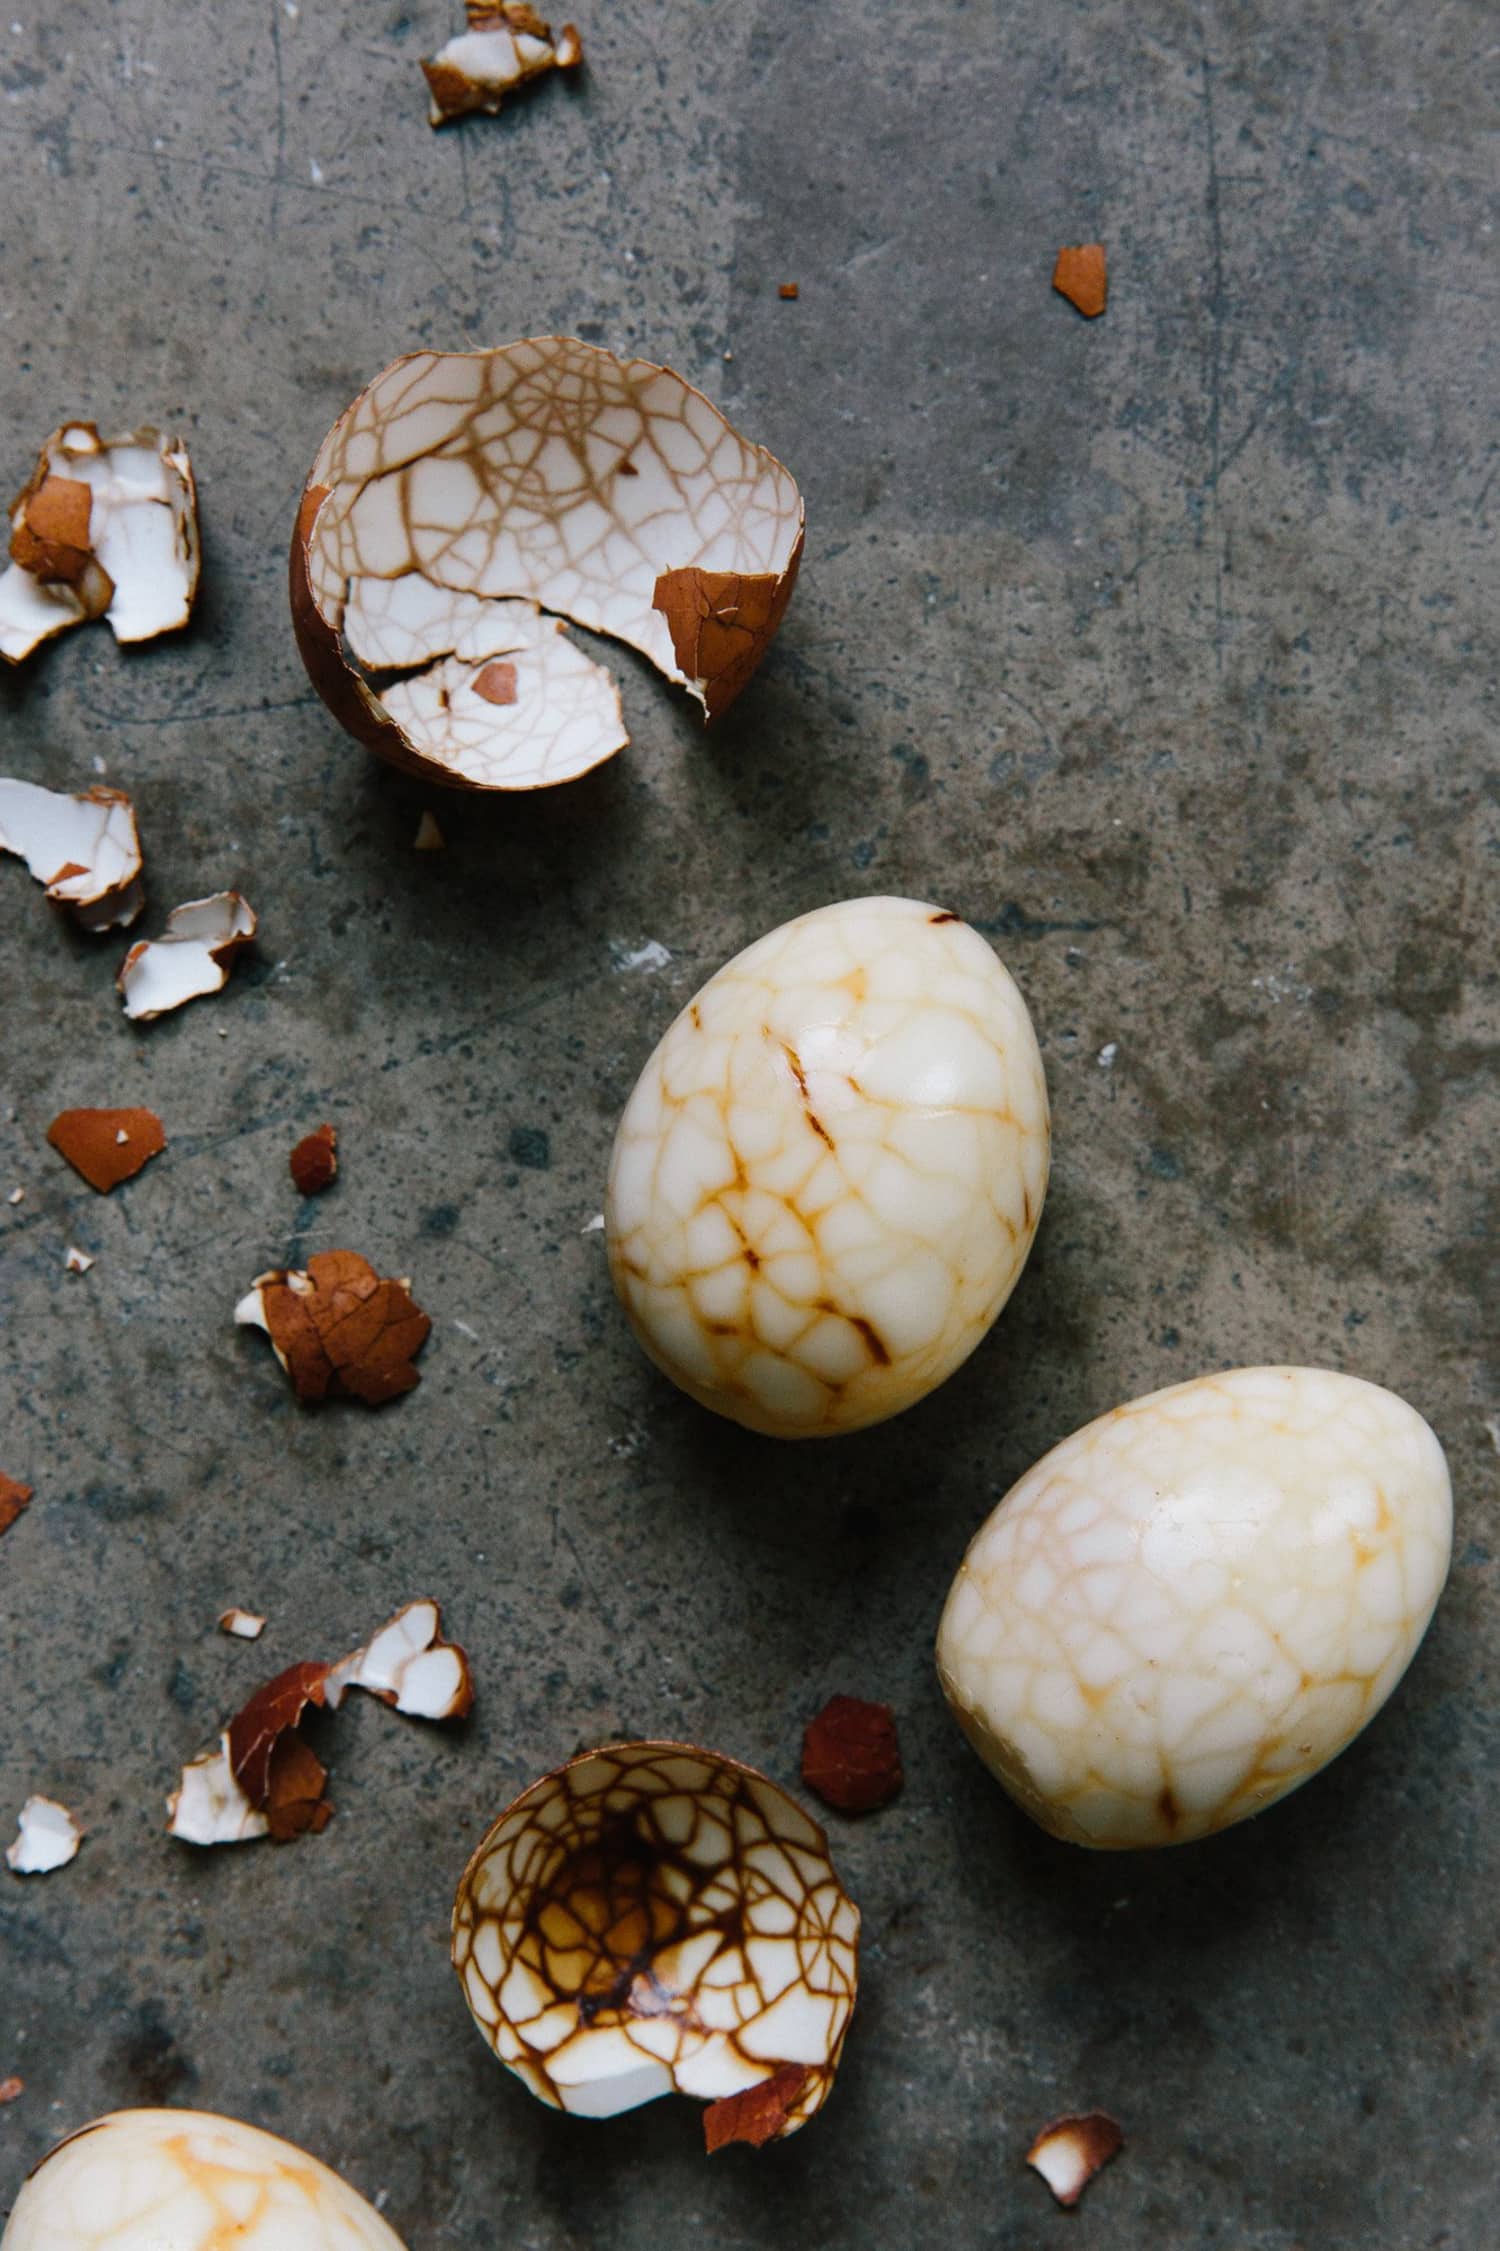 How To Make Chinese Marbled Tea Eggs | Kitchn